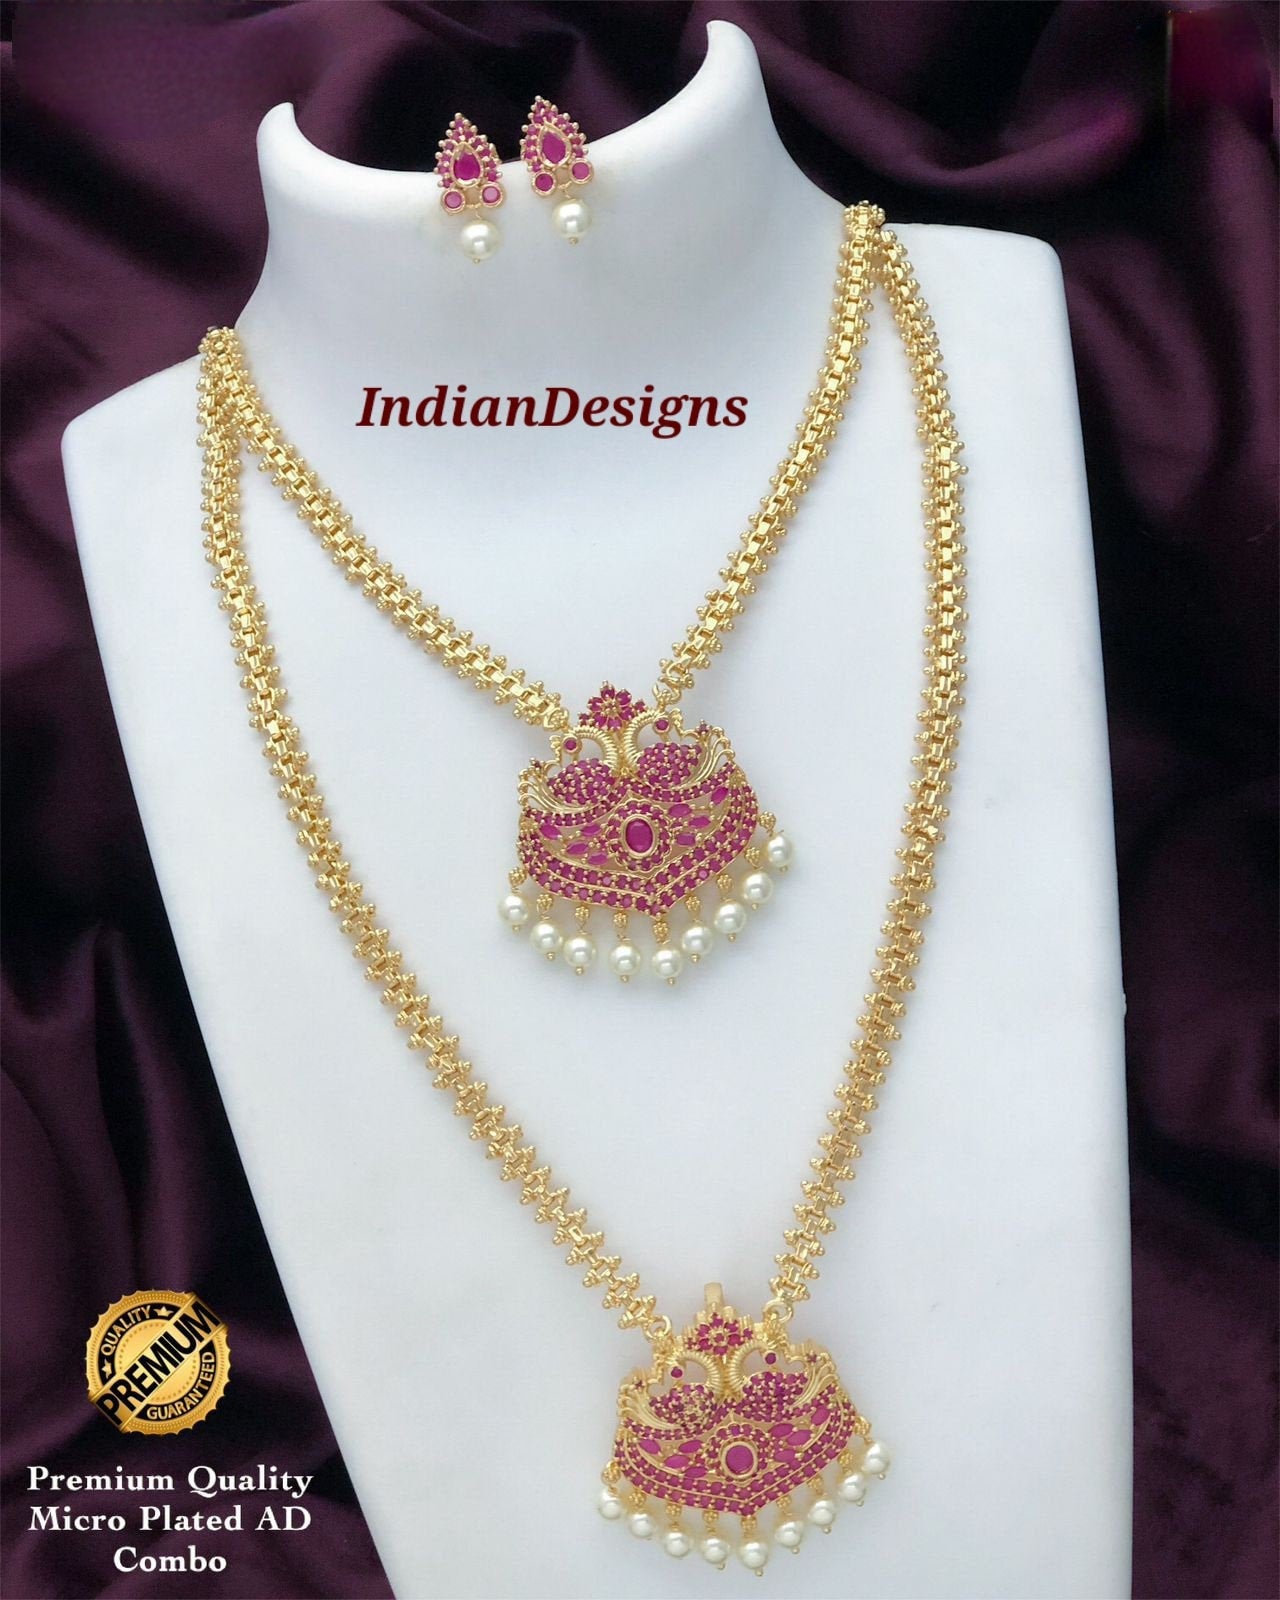 Latest light weight gold bridal necklace designs collection 2020 | Weddi...  | Bridal necklace designs, Gold bridal necklace, Gold jewelry fashion